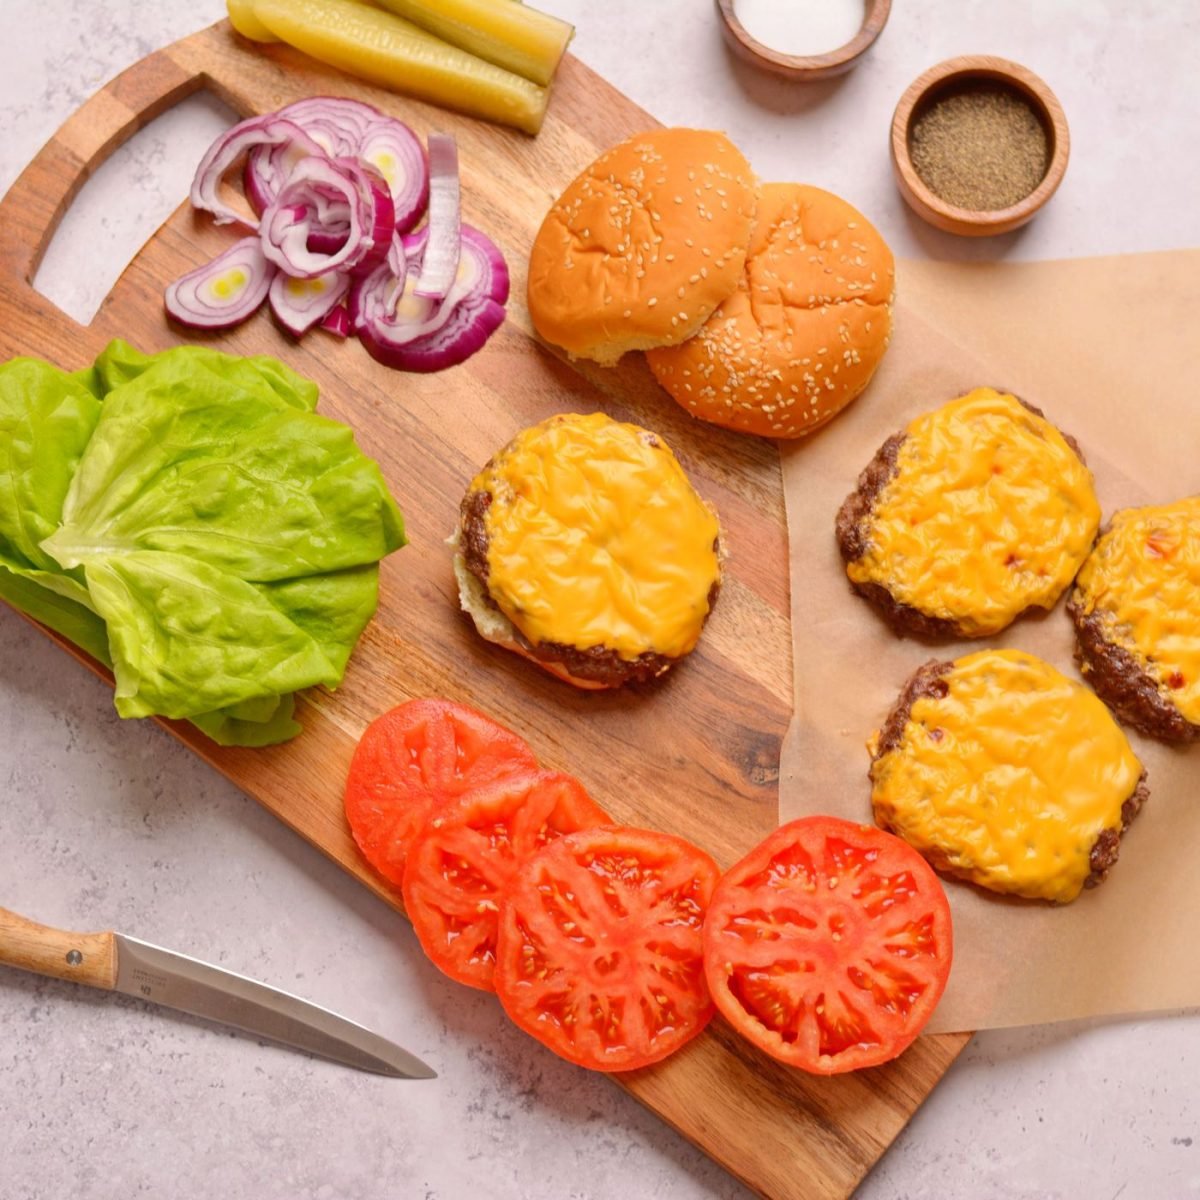 Burgers with cheese, tomaotes, lettuce, red onion, pickles on a wood cutting board.